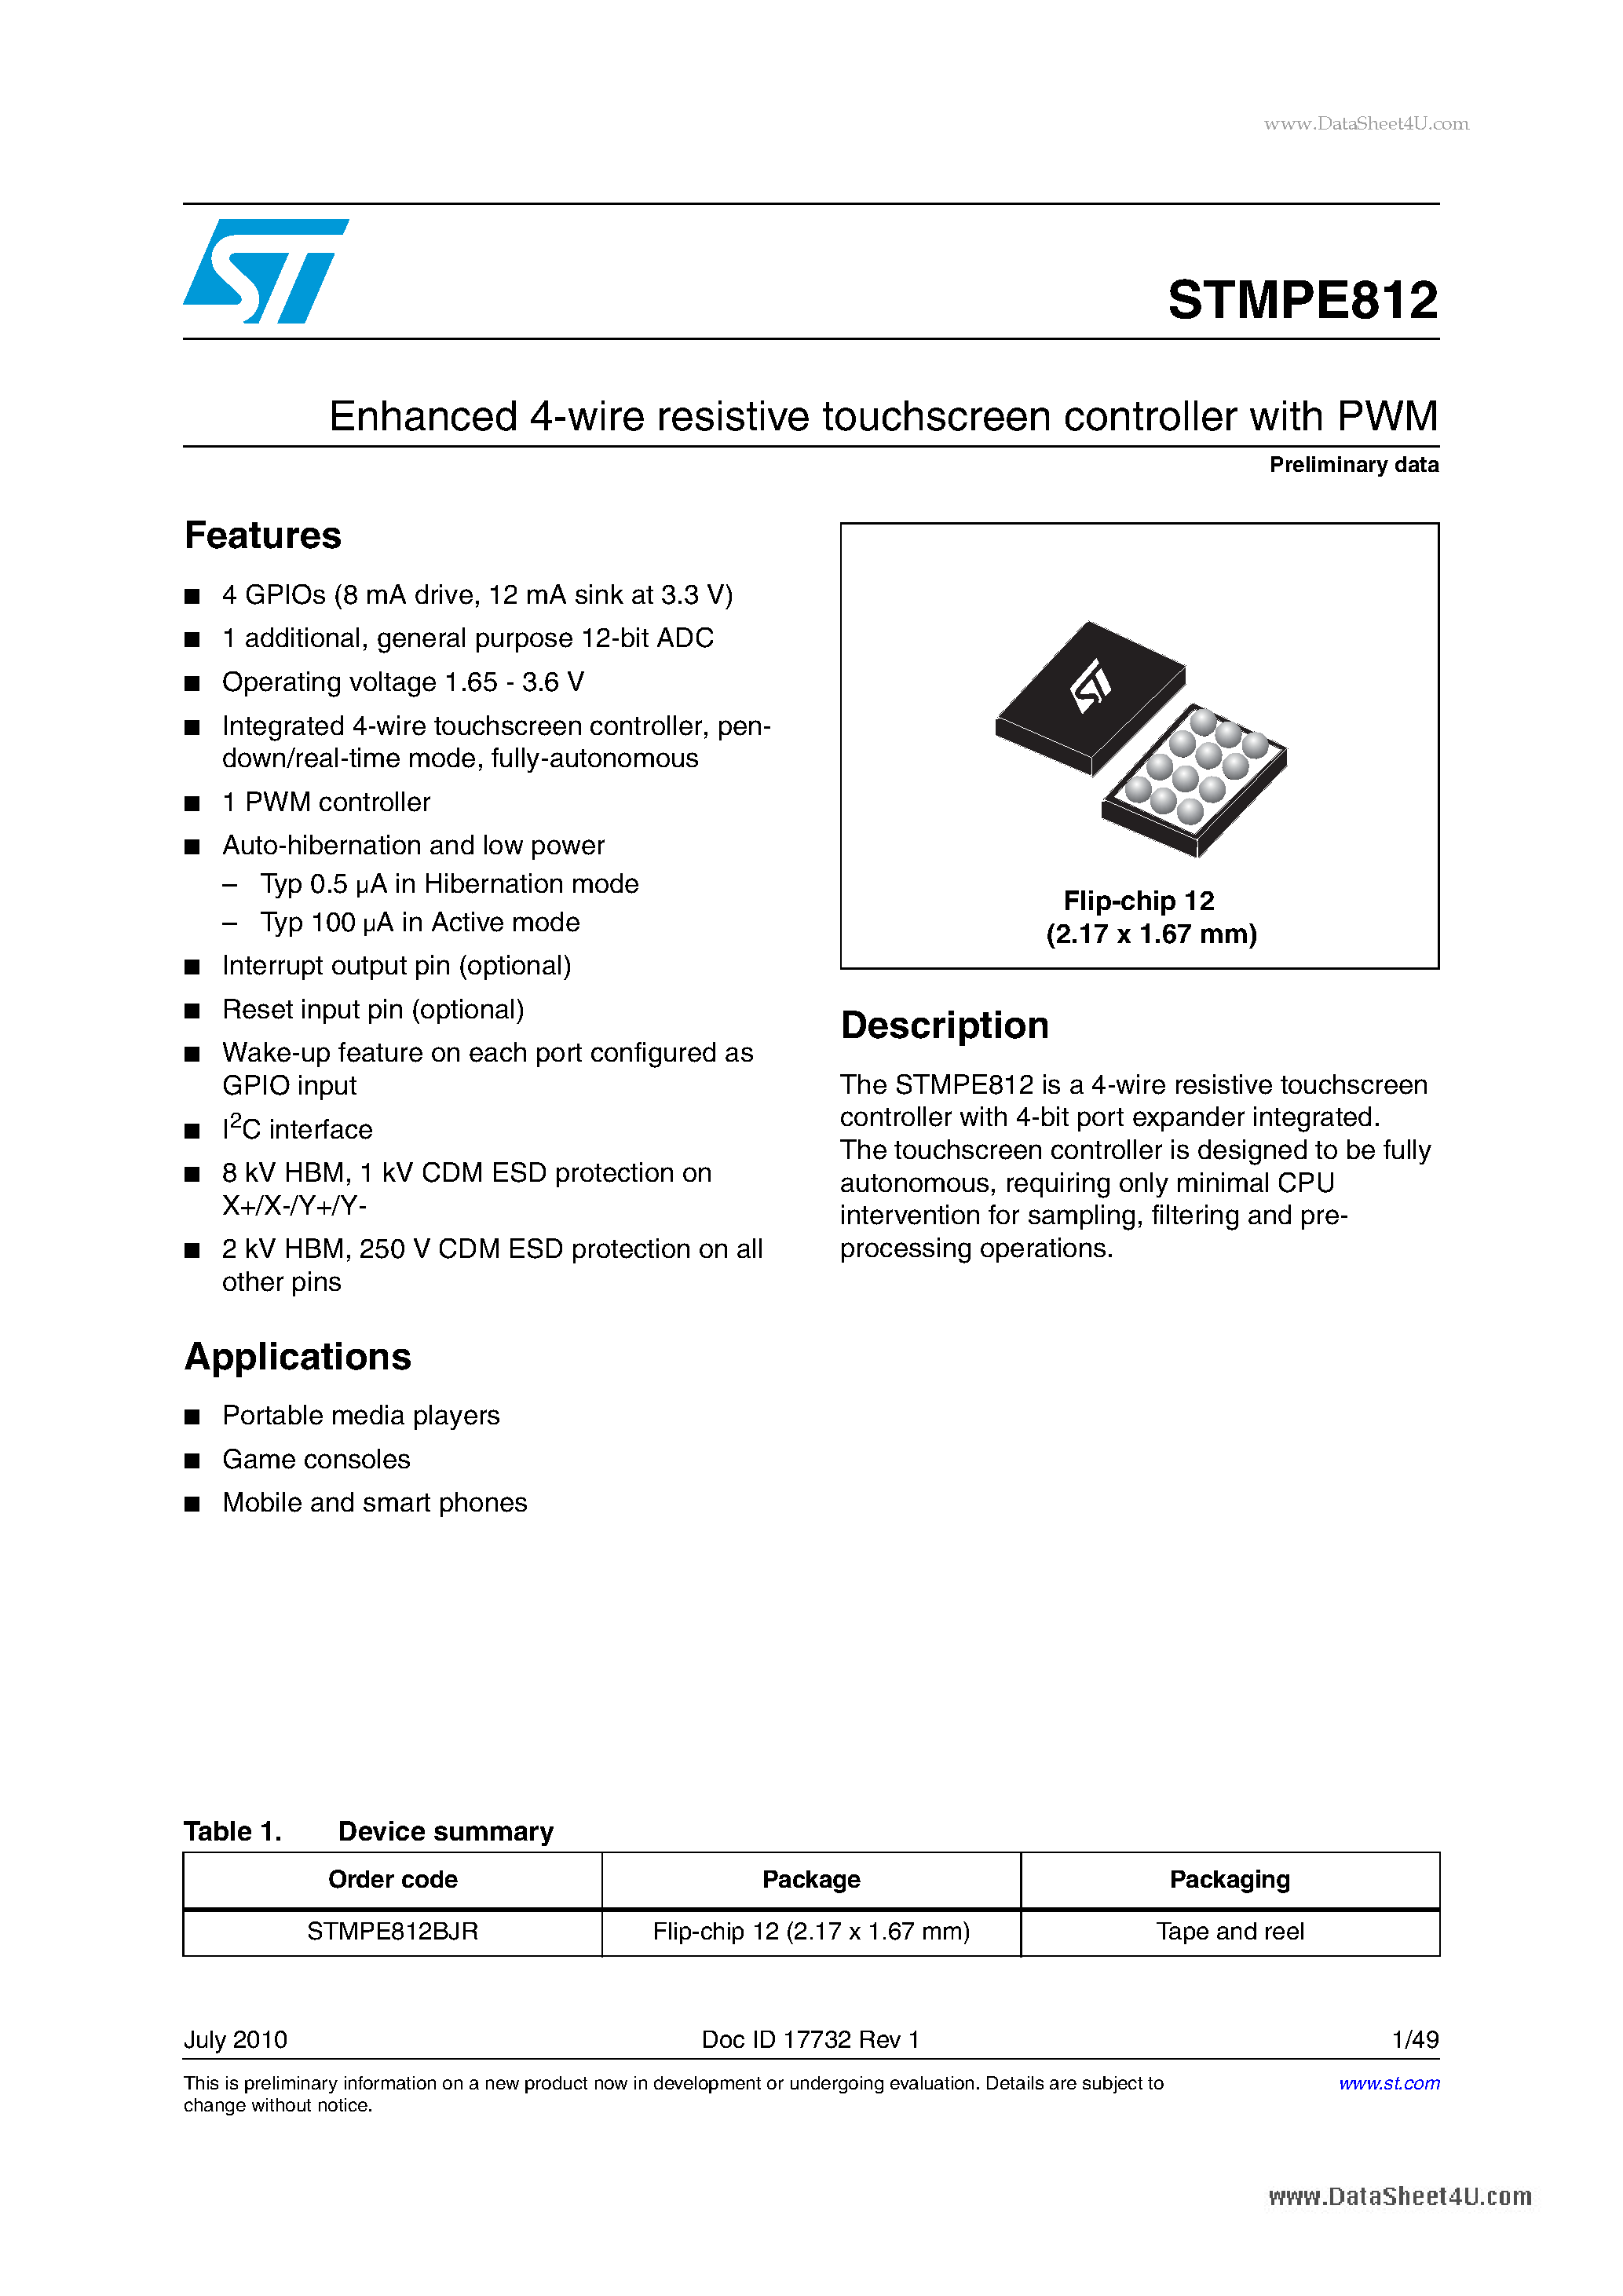 Datasheet STMPE812 - Enhanced 4-wire resistive touchscreen controller page 1